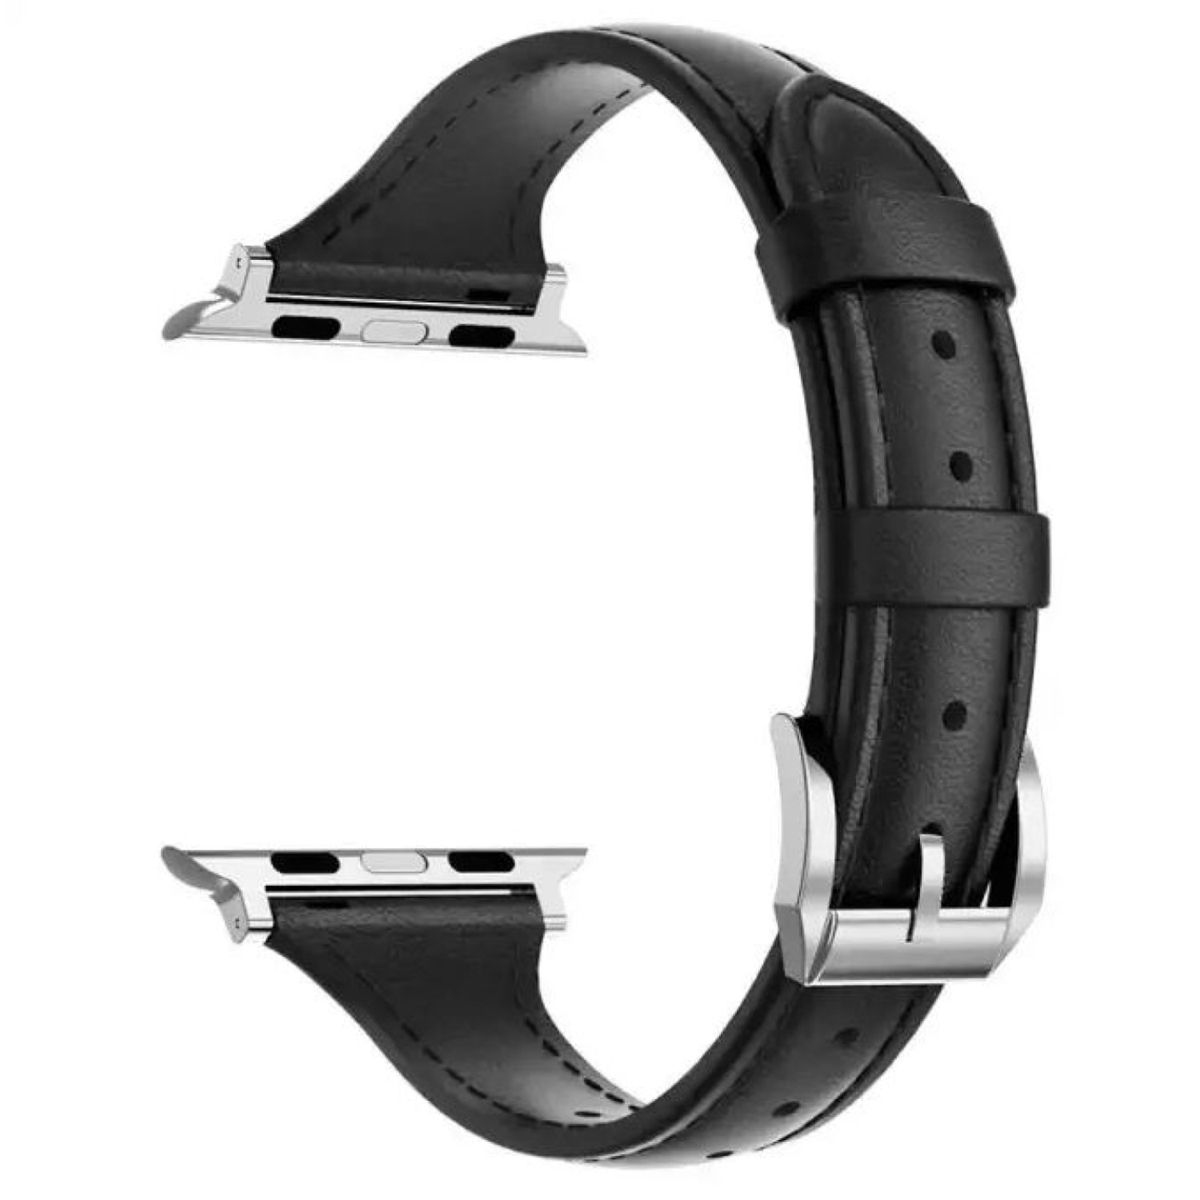 Apple Watch Slim Leather Replacement Strap 38mm 40mm | Shop Today. Get ...